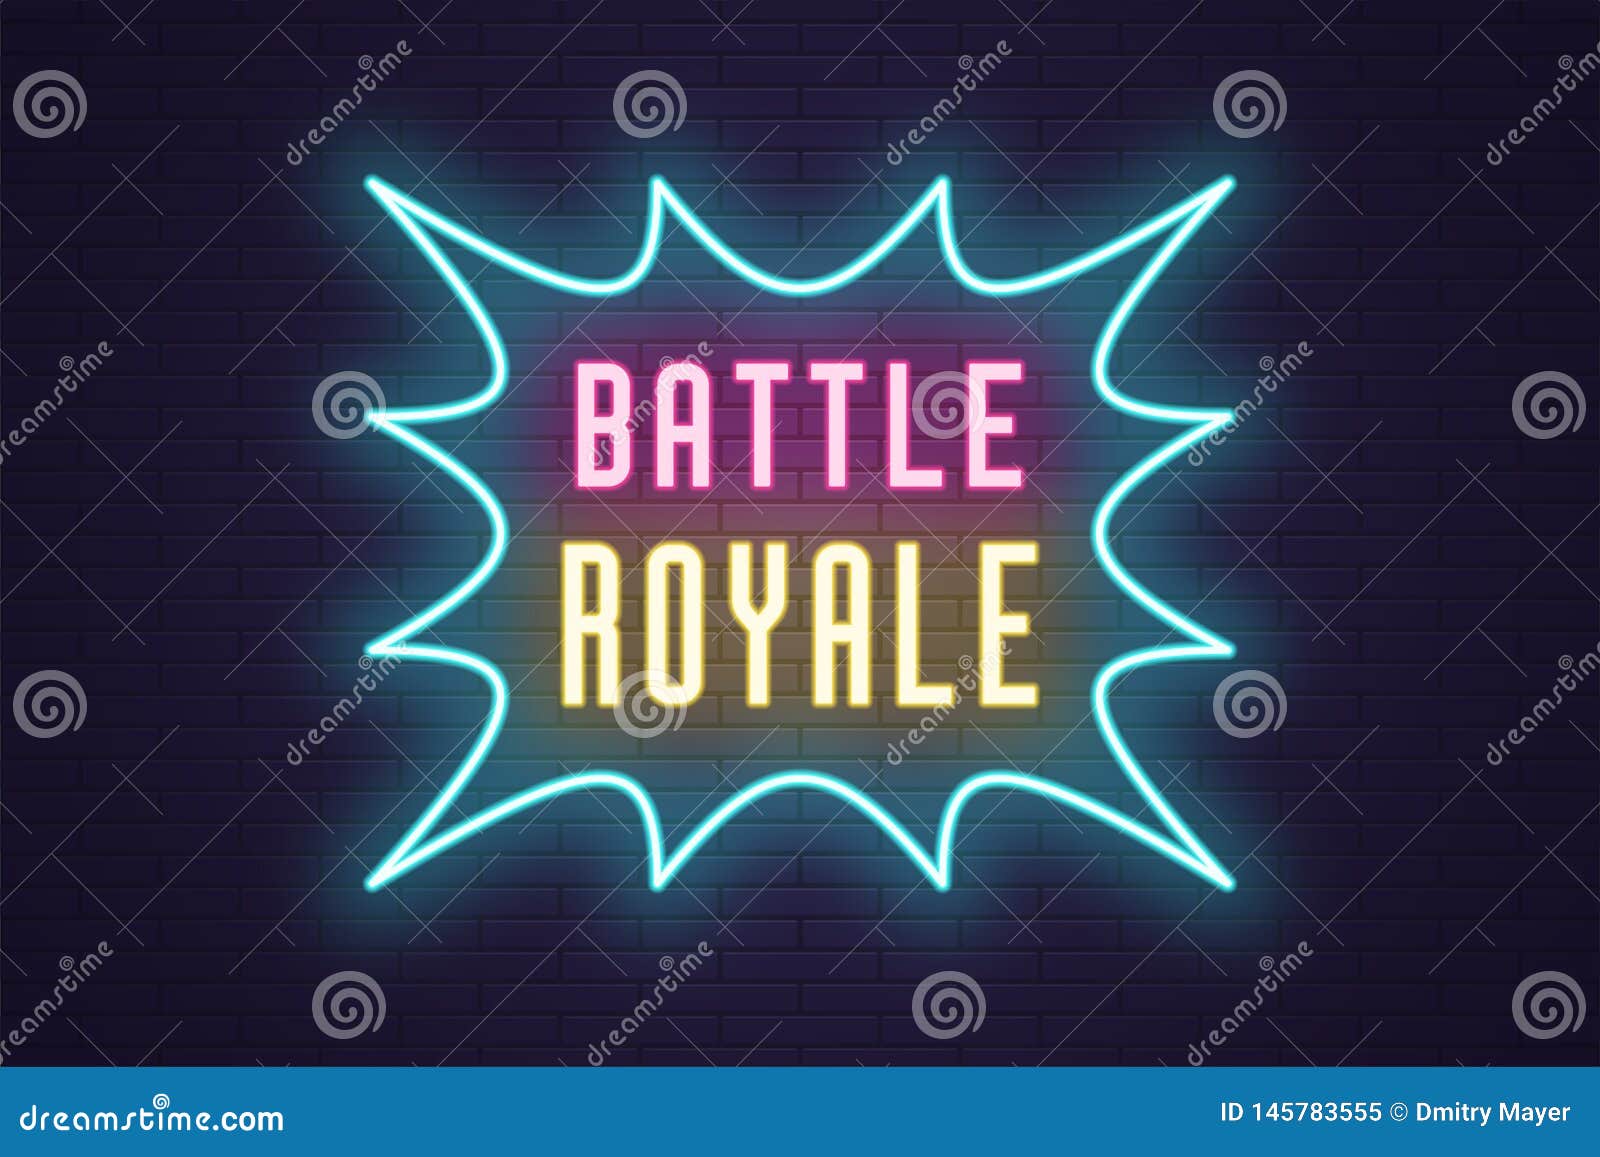 Neon Composition Of Headline Battle Royale Text Stock Vector Illustration Of Ground Explosion